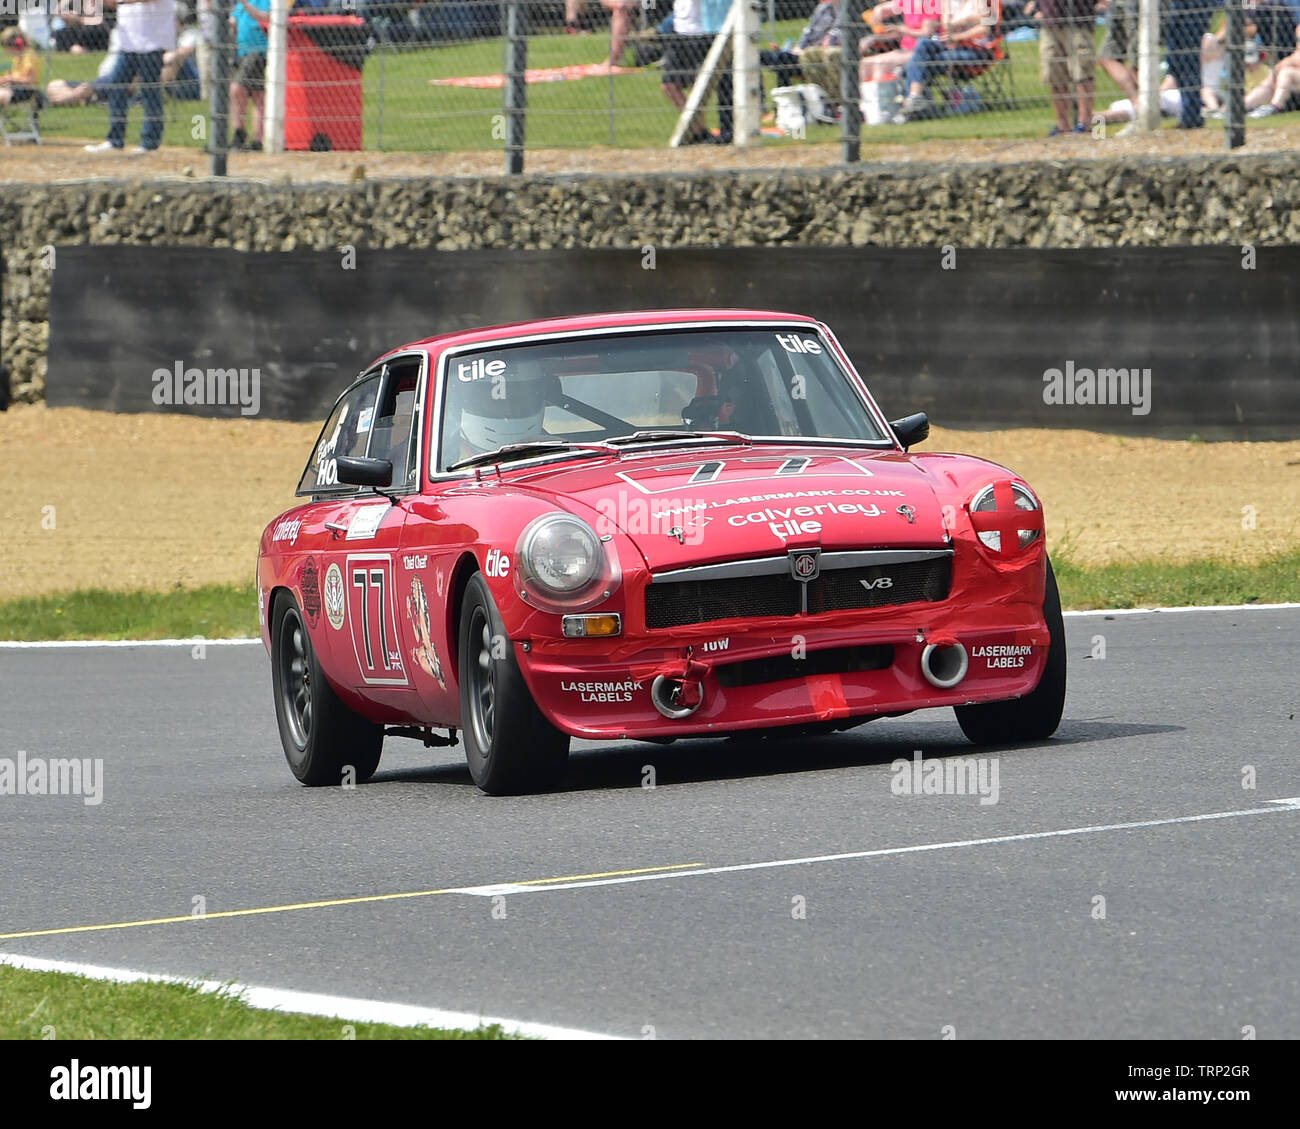 Barry Holmes, MGB GT V8, Bernies V8s, Classic US Muscle Cars, American Speedfest VII, Brands Hatch, June 2019, automobiles, Autosport, cars, circuit r Stock Photo